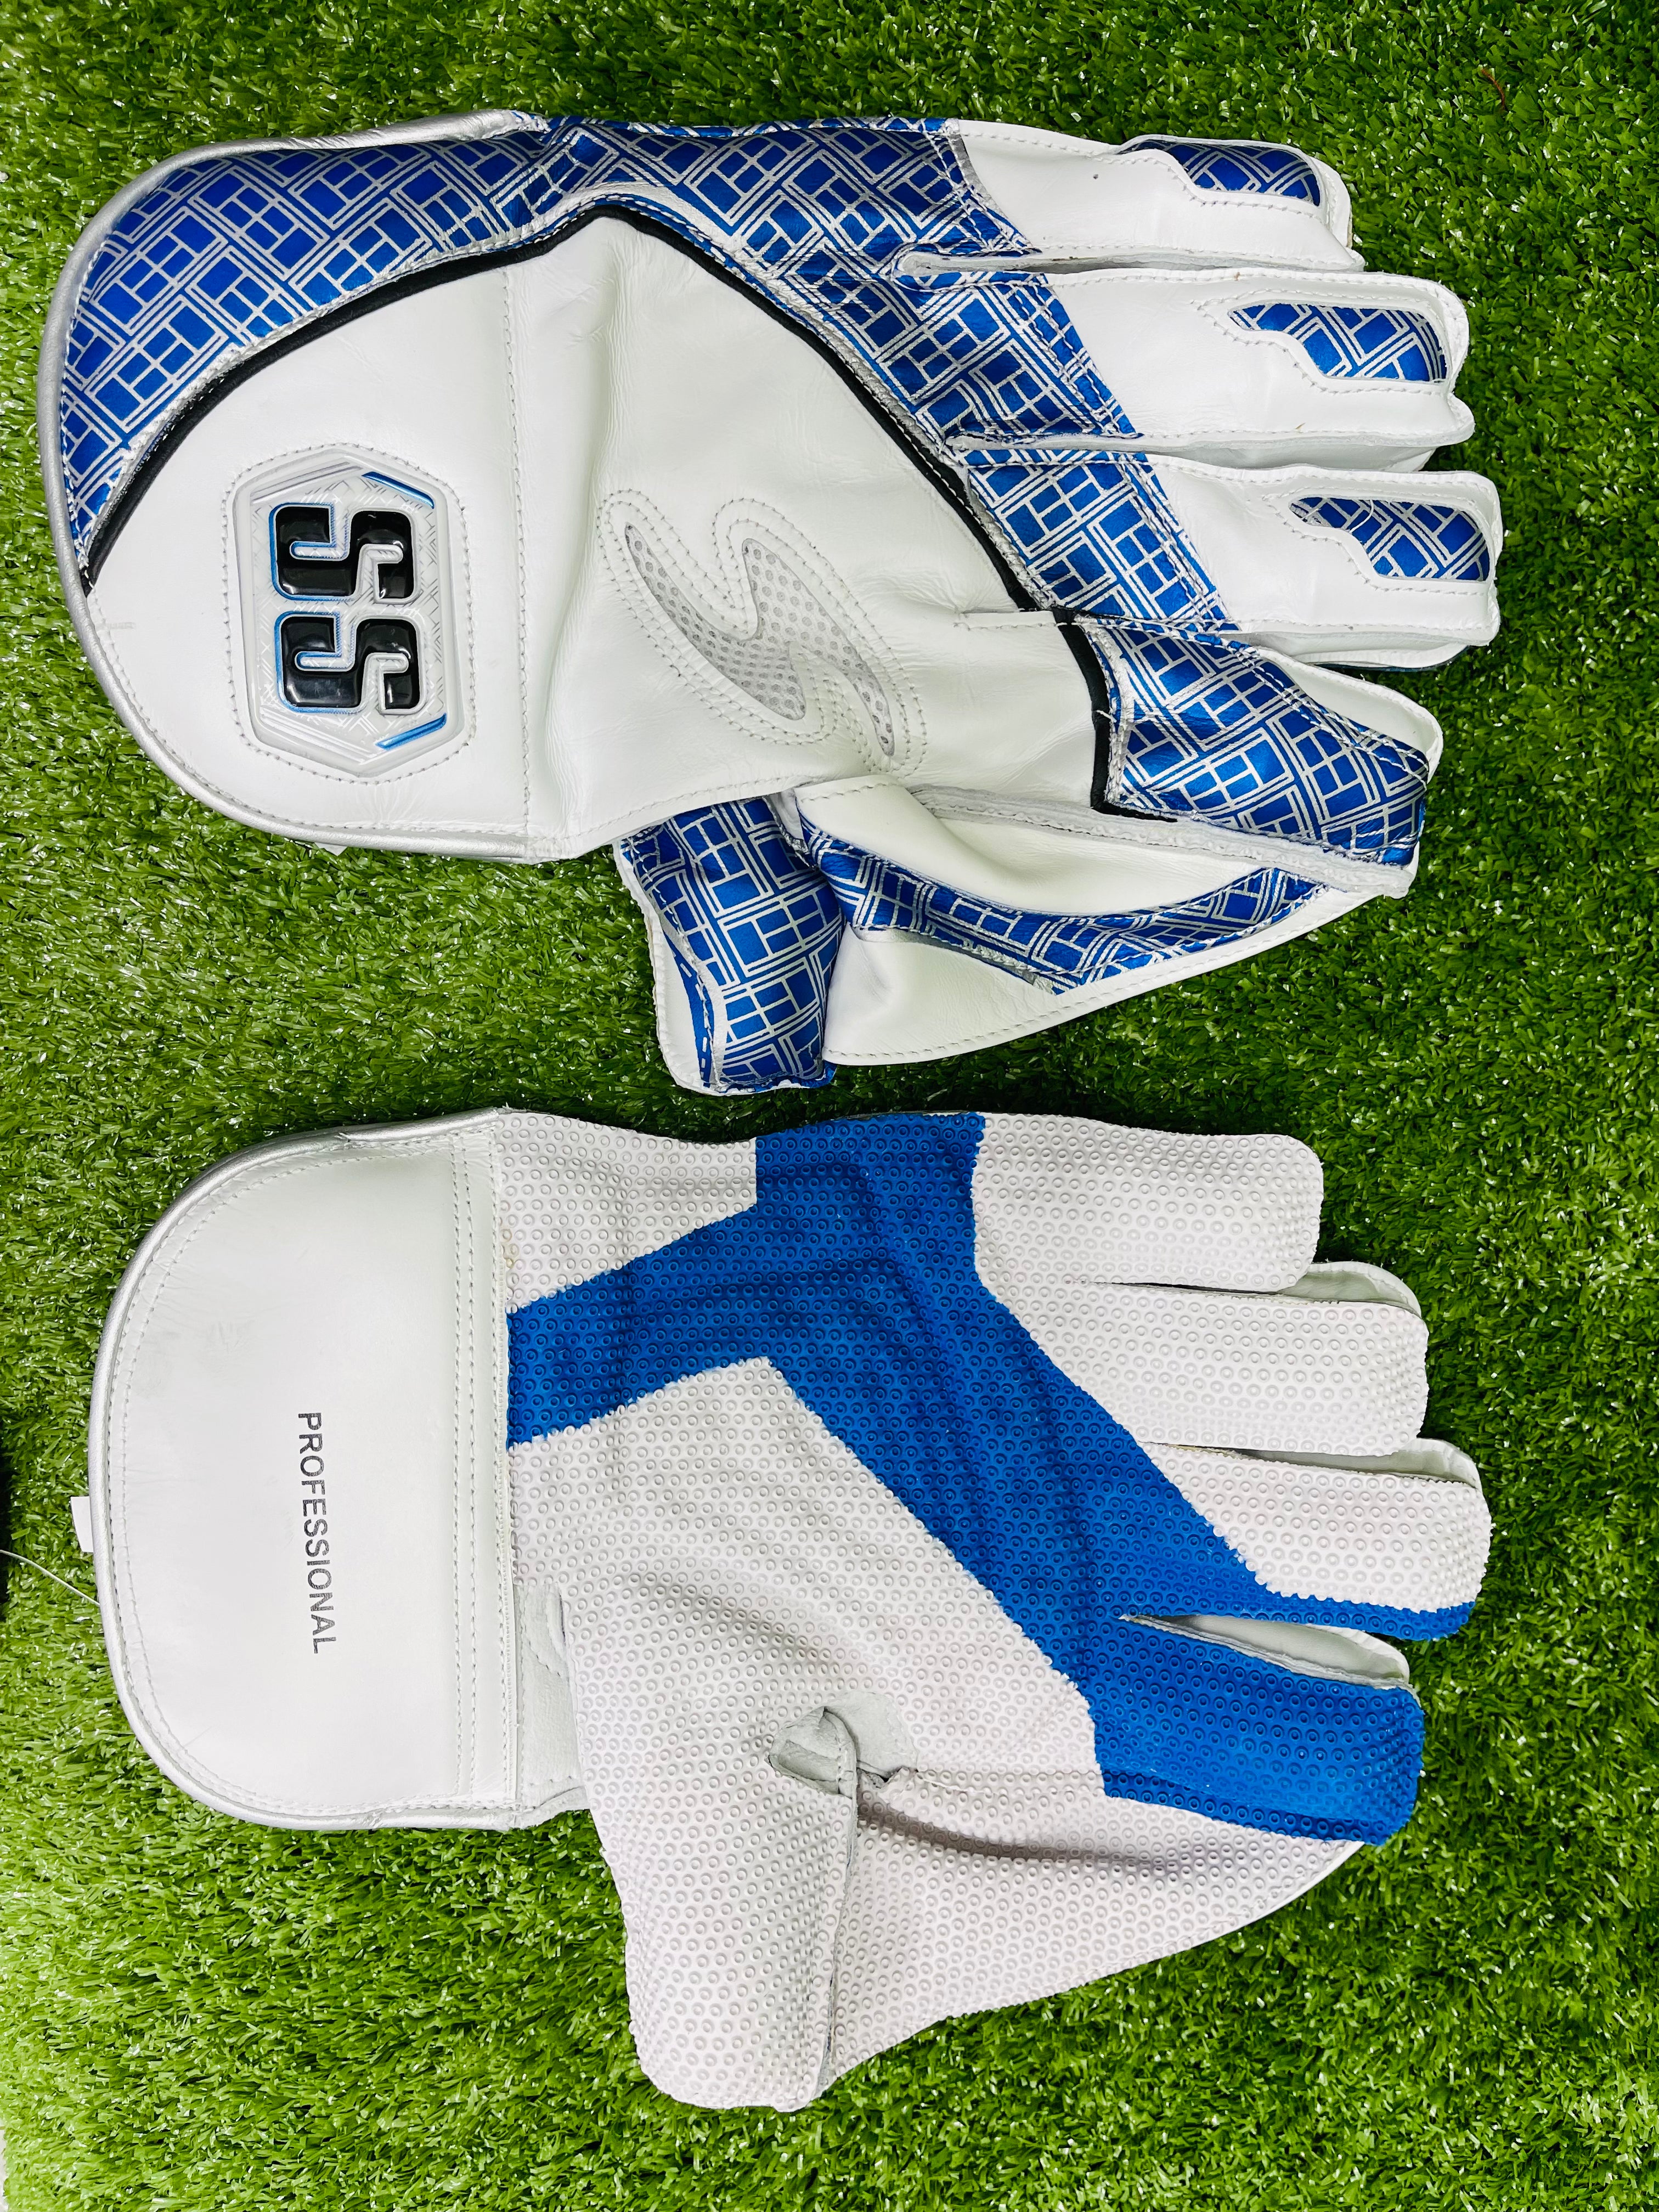 SS Professional Adult Cricket Wicket Keeping Gloves